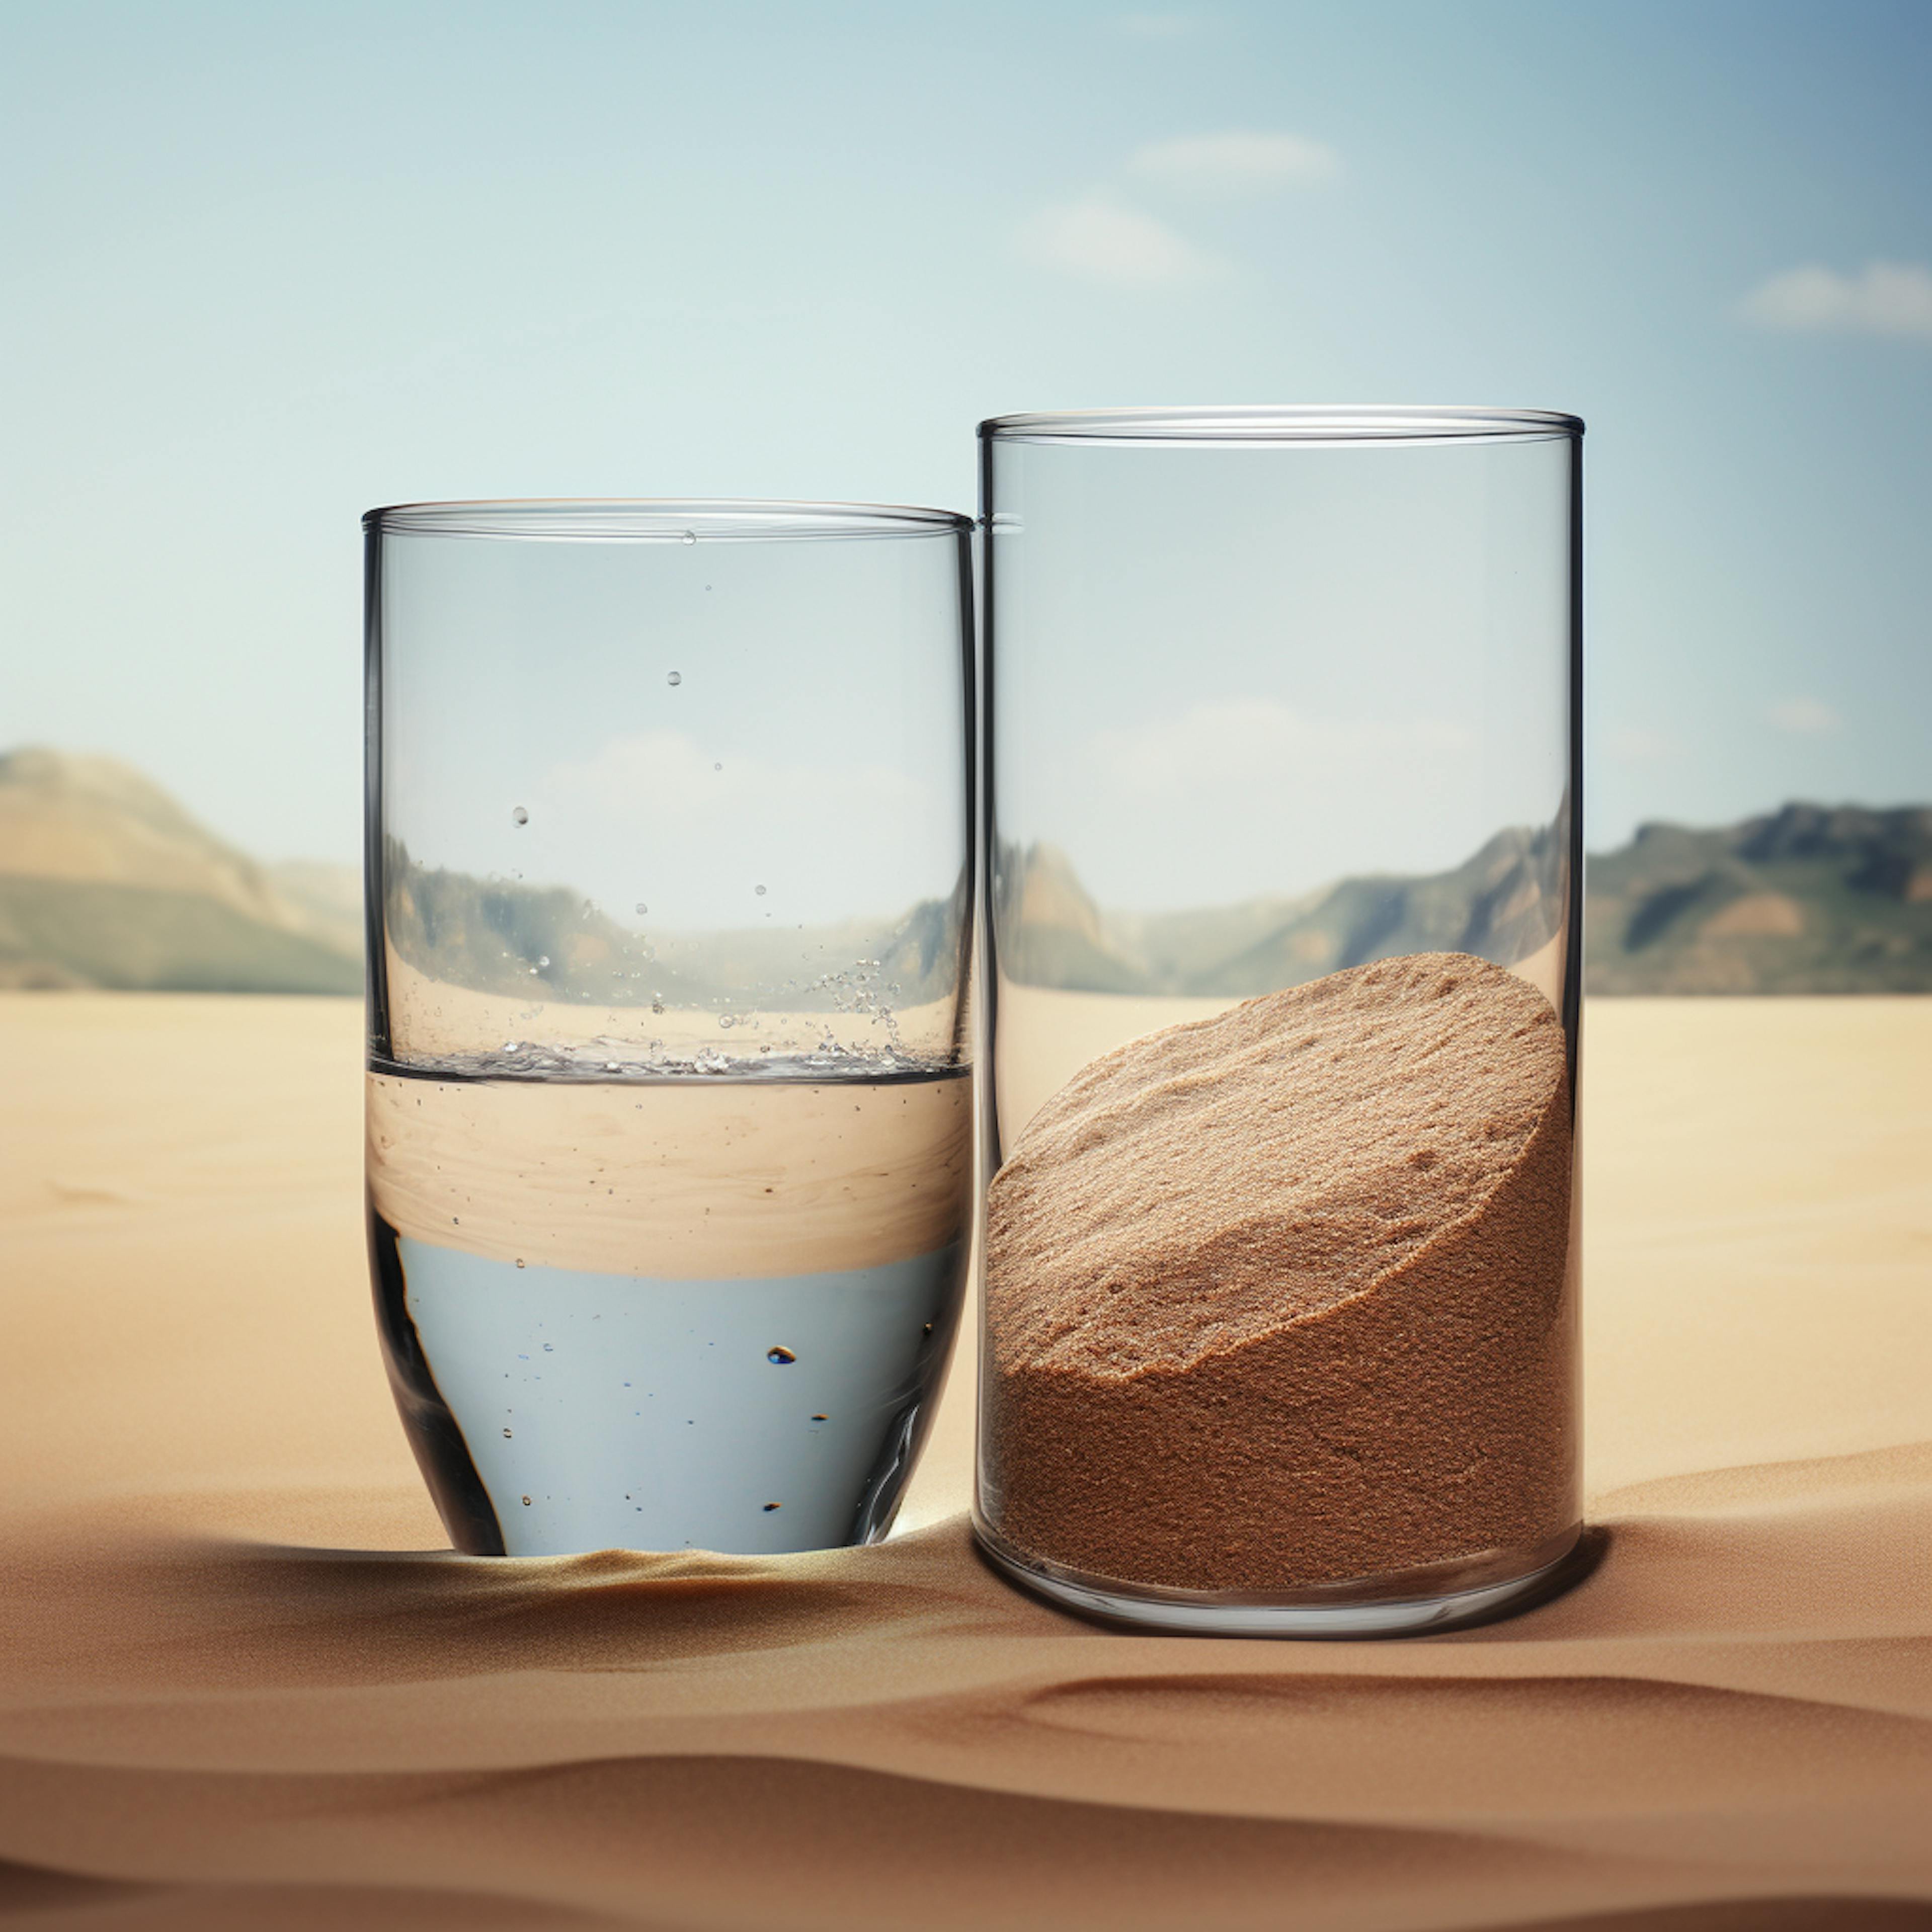 A glass of water and a glass of sand